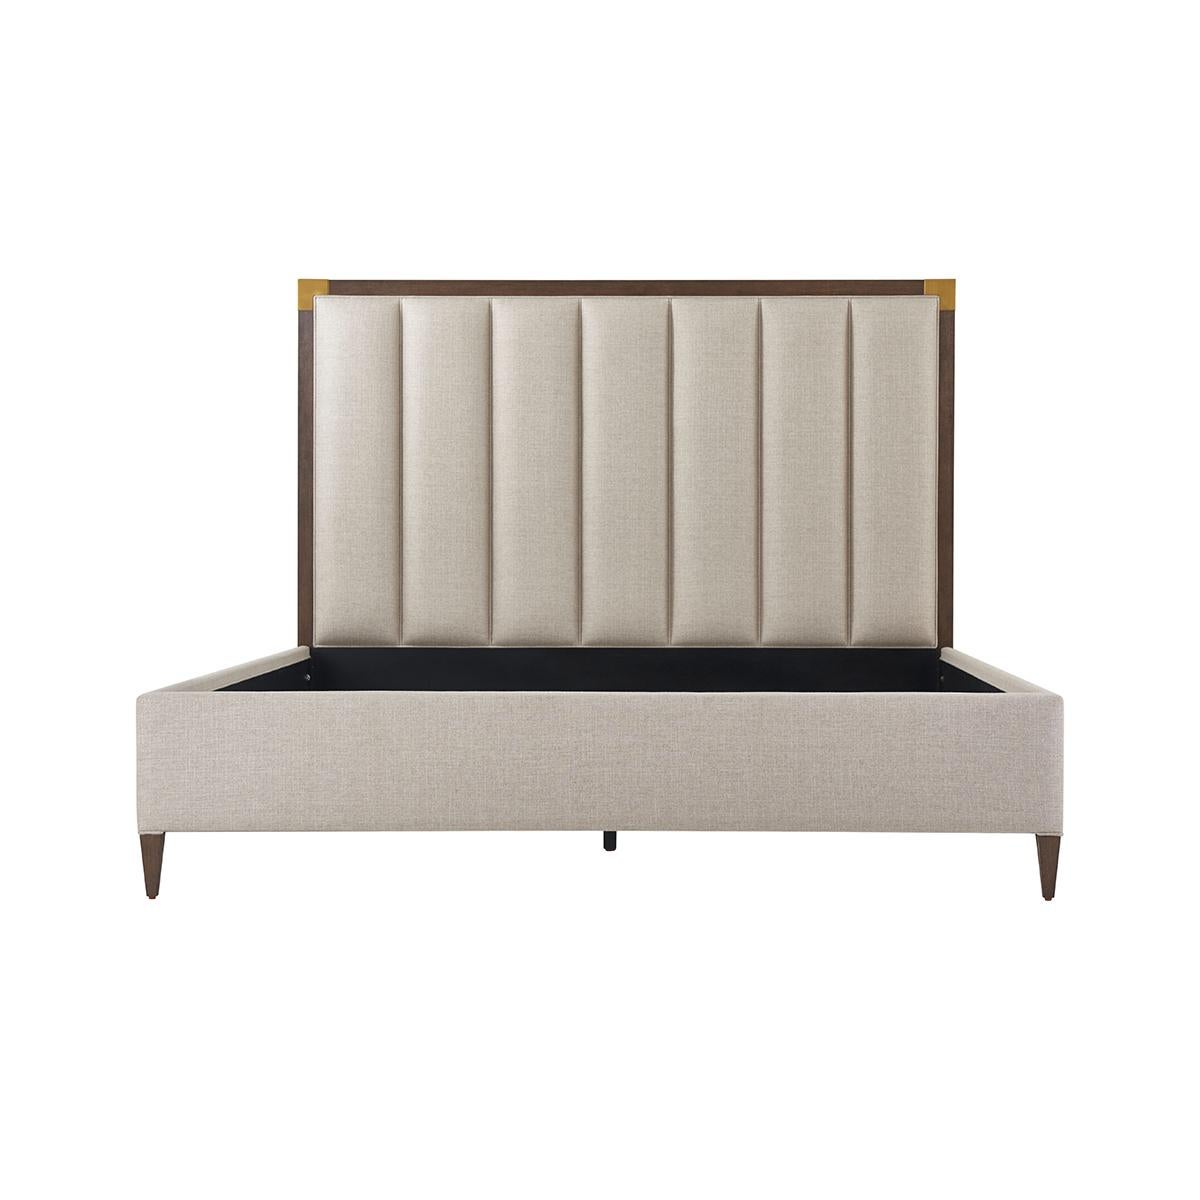 With a Cardamon finish frame and brushed brass finish corner mounts with a vertically channeled upholstered headboard, upholstered rails and raised on tapered legs.

Dimensions: 76.25